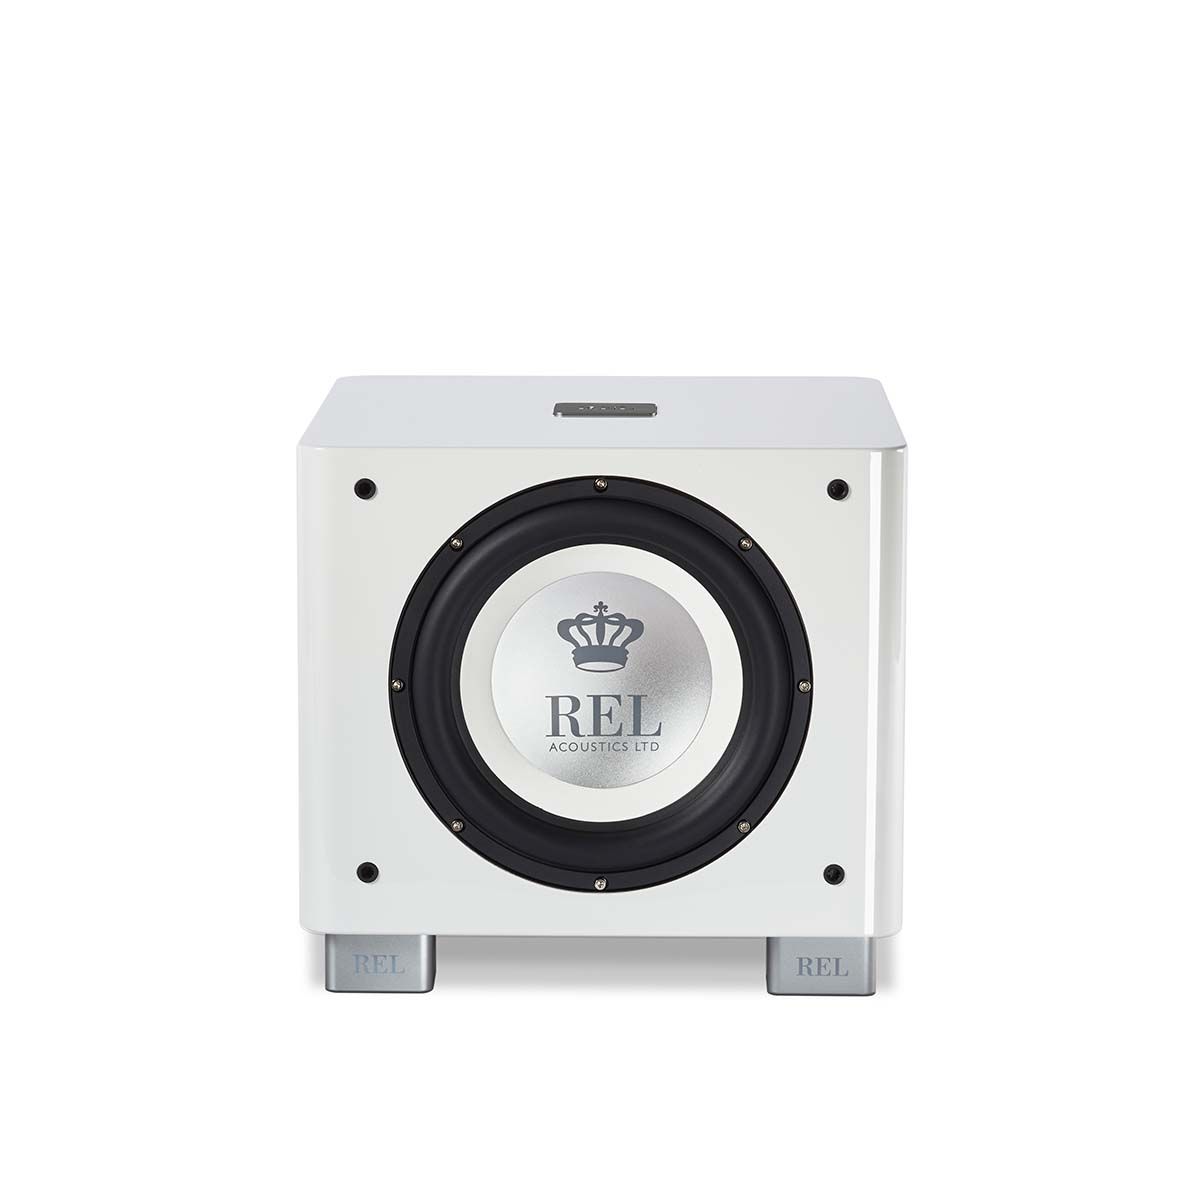 REL Acoustics T/9x Subwoofer, white, front view without grille